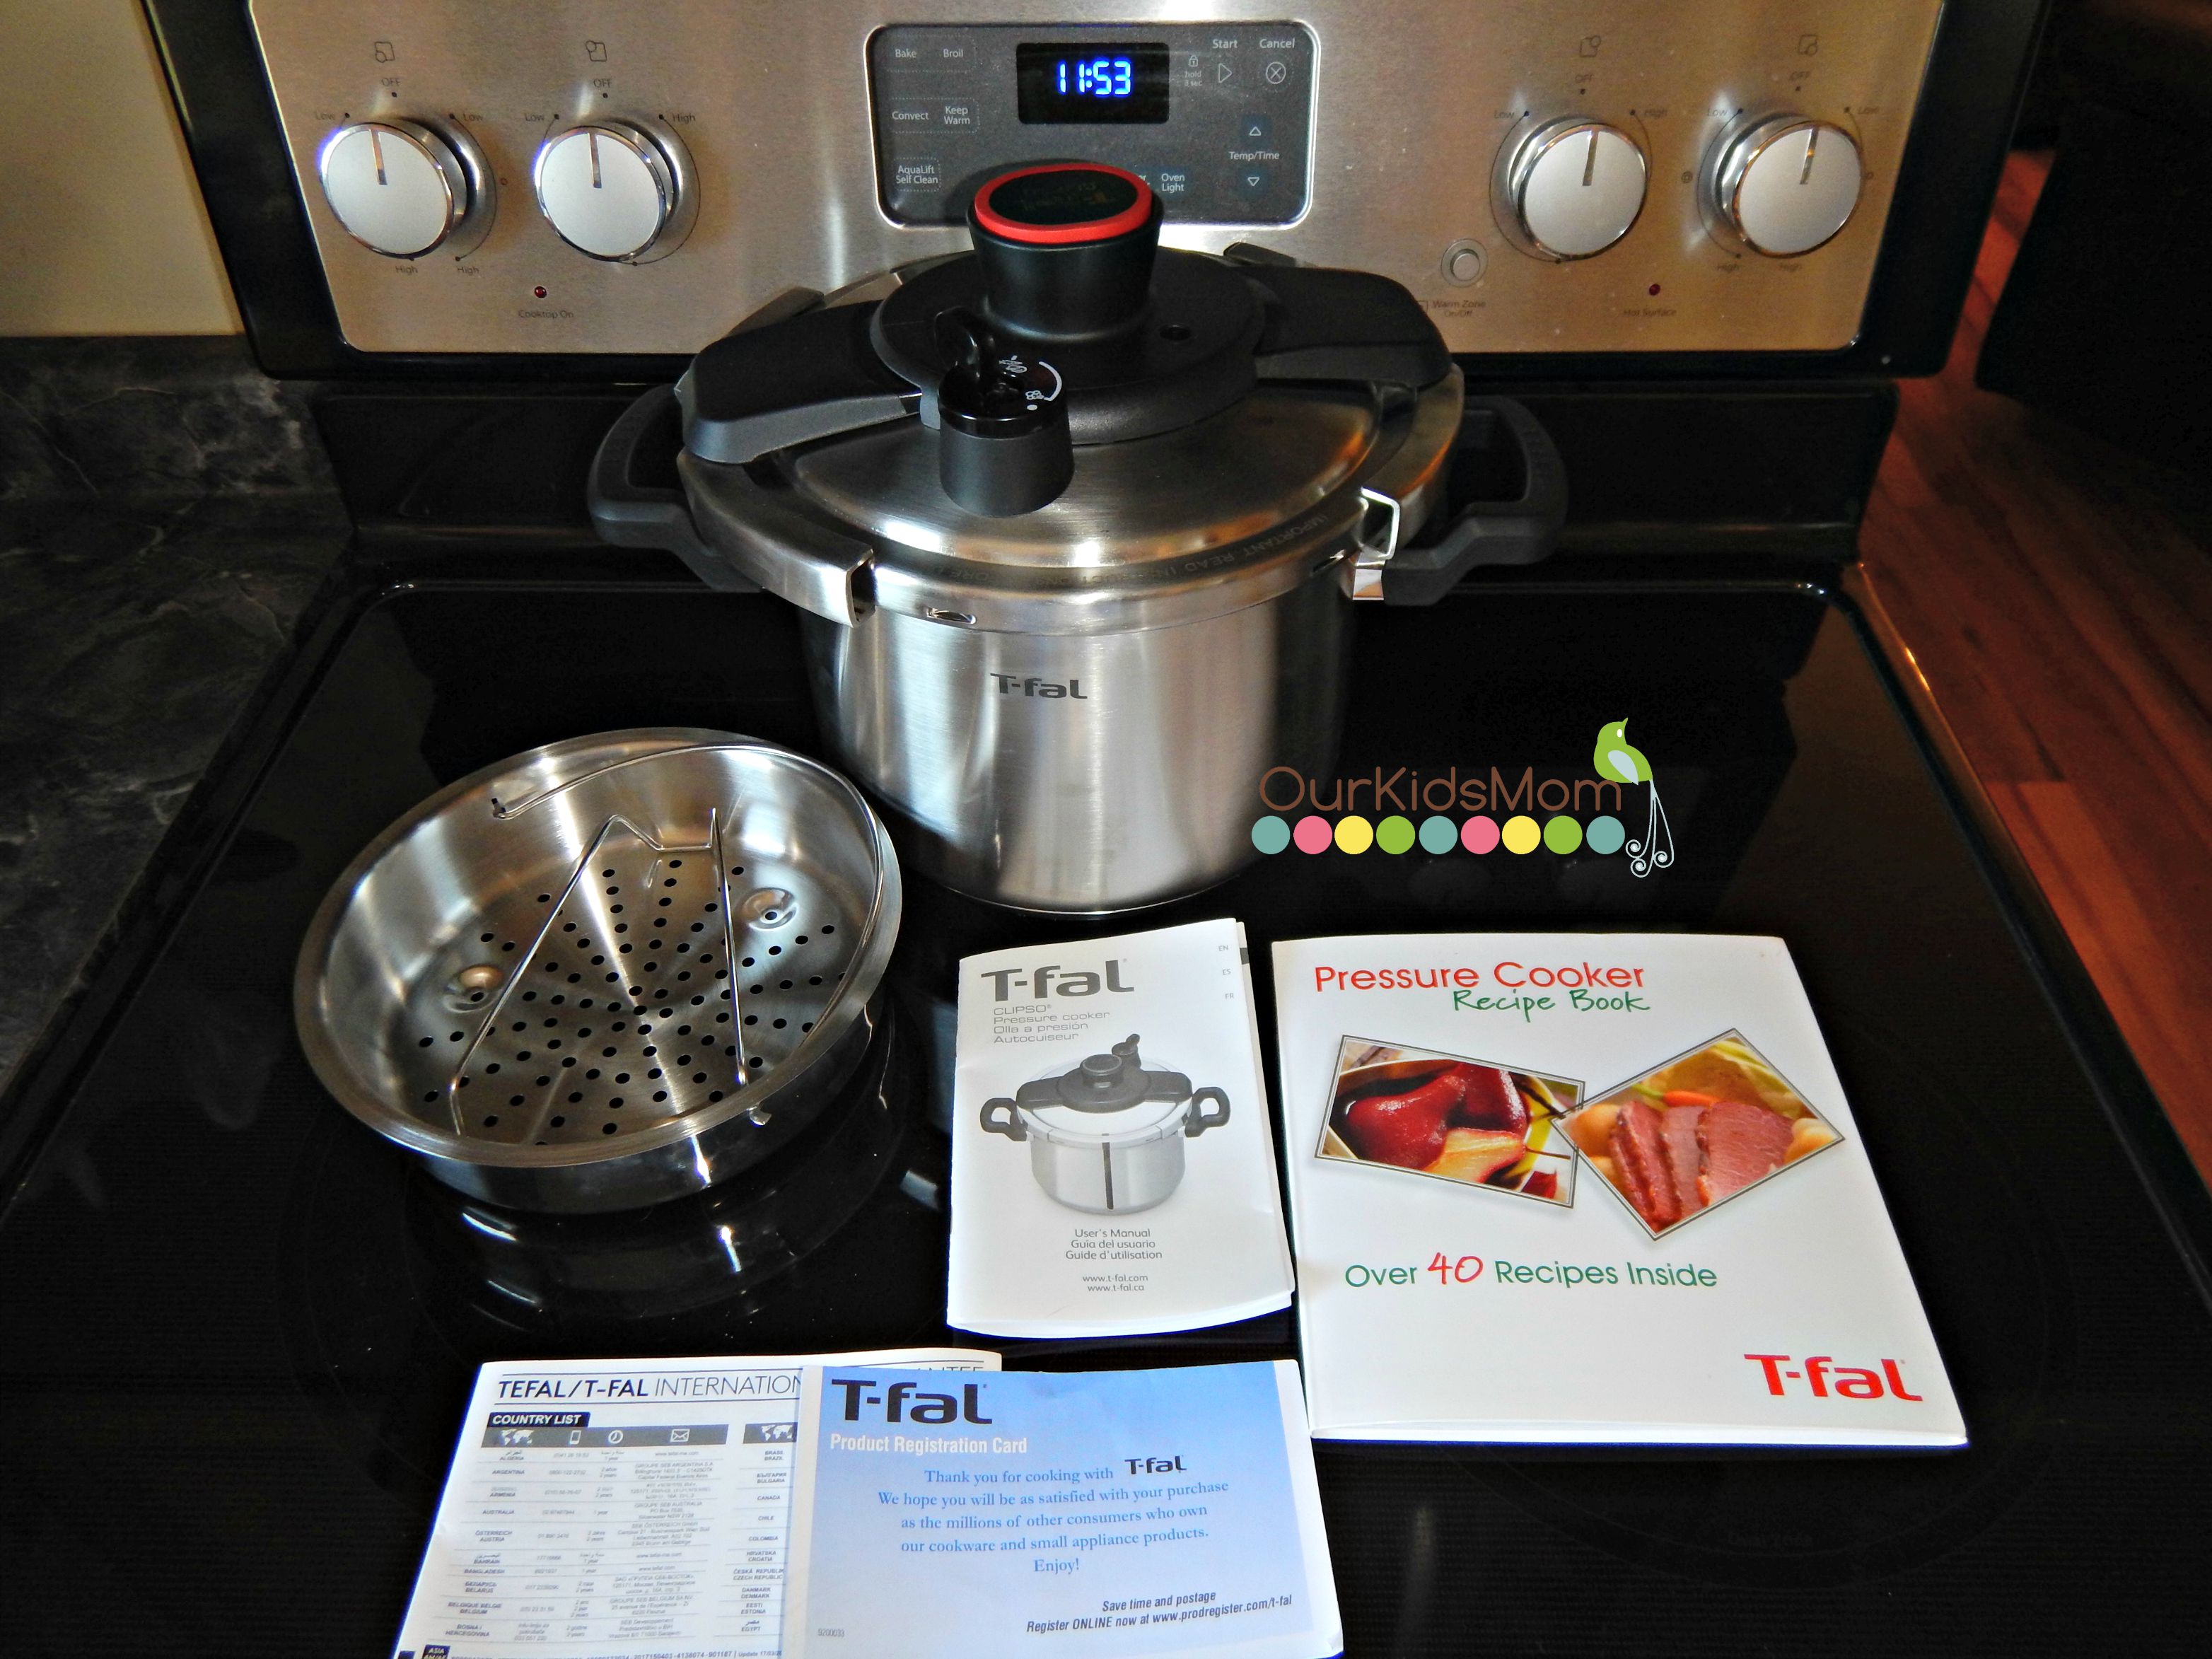  T-Fal Quick & Clean Stainless Steel Pressure Cooker